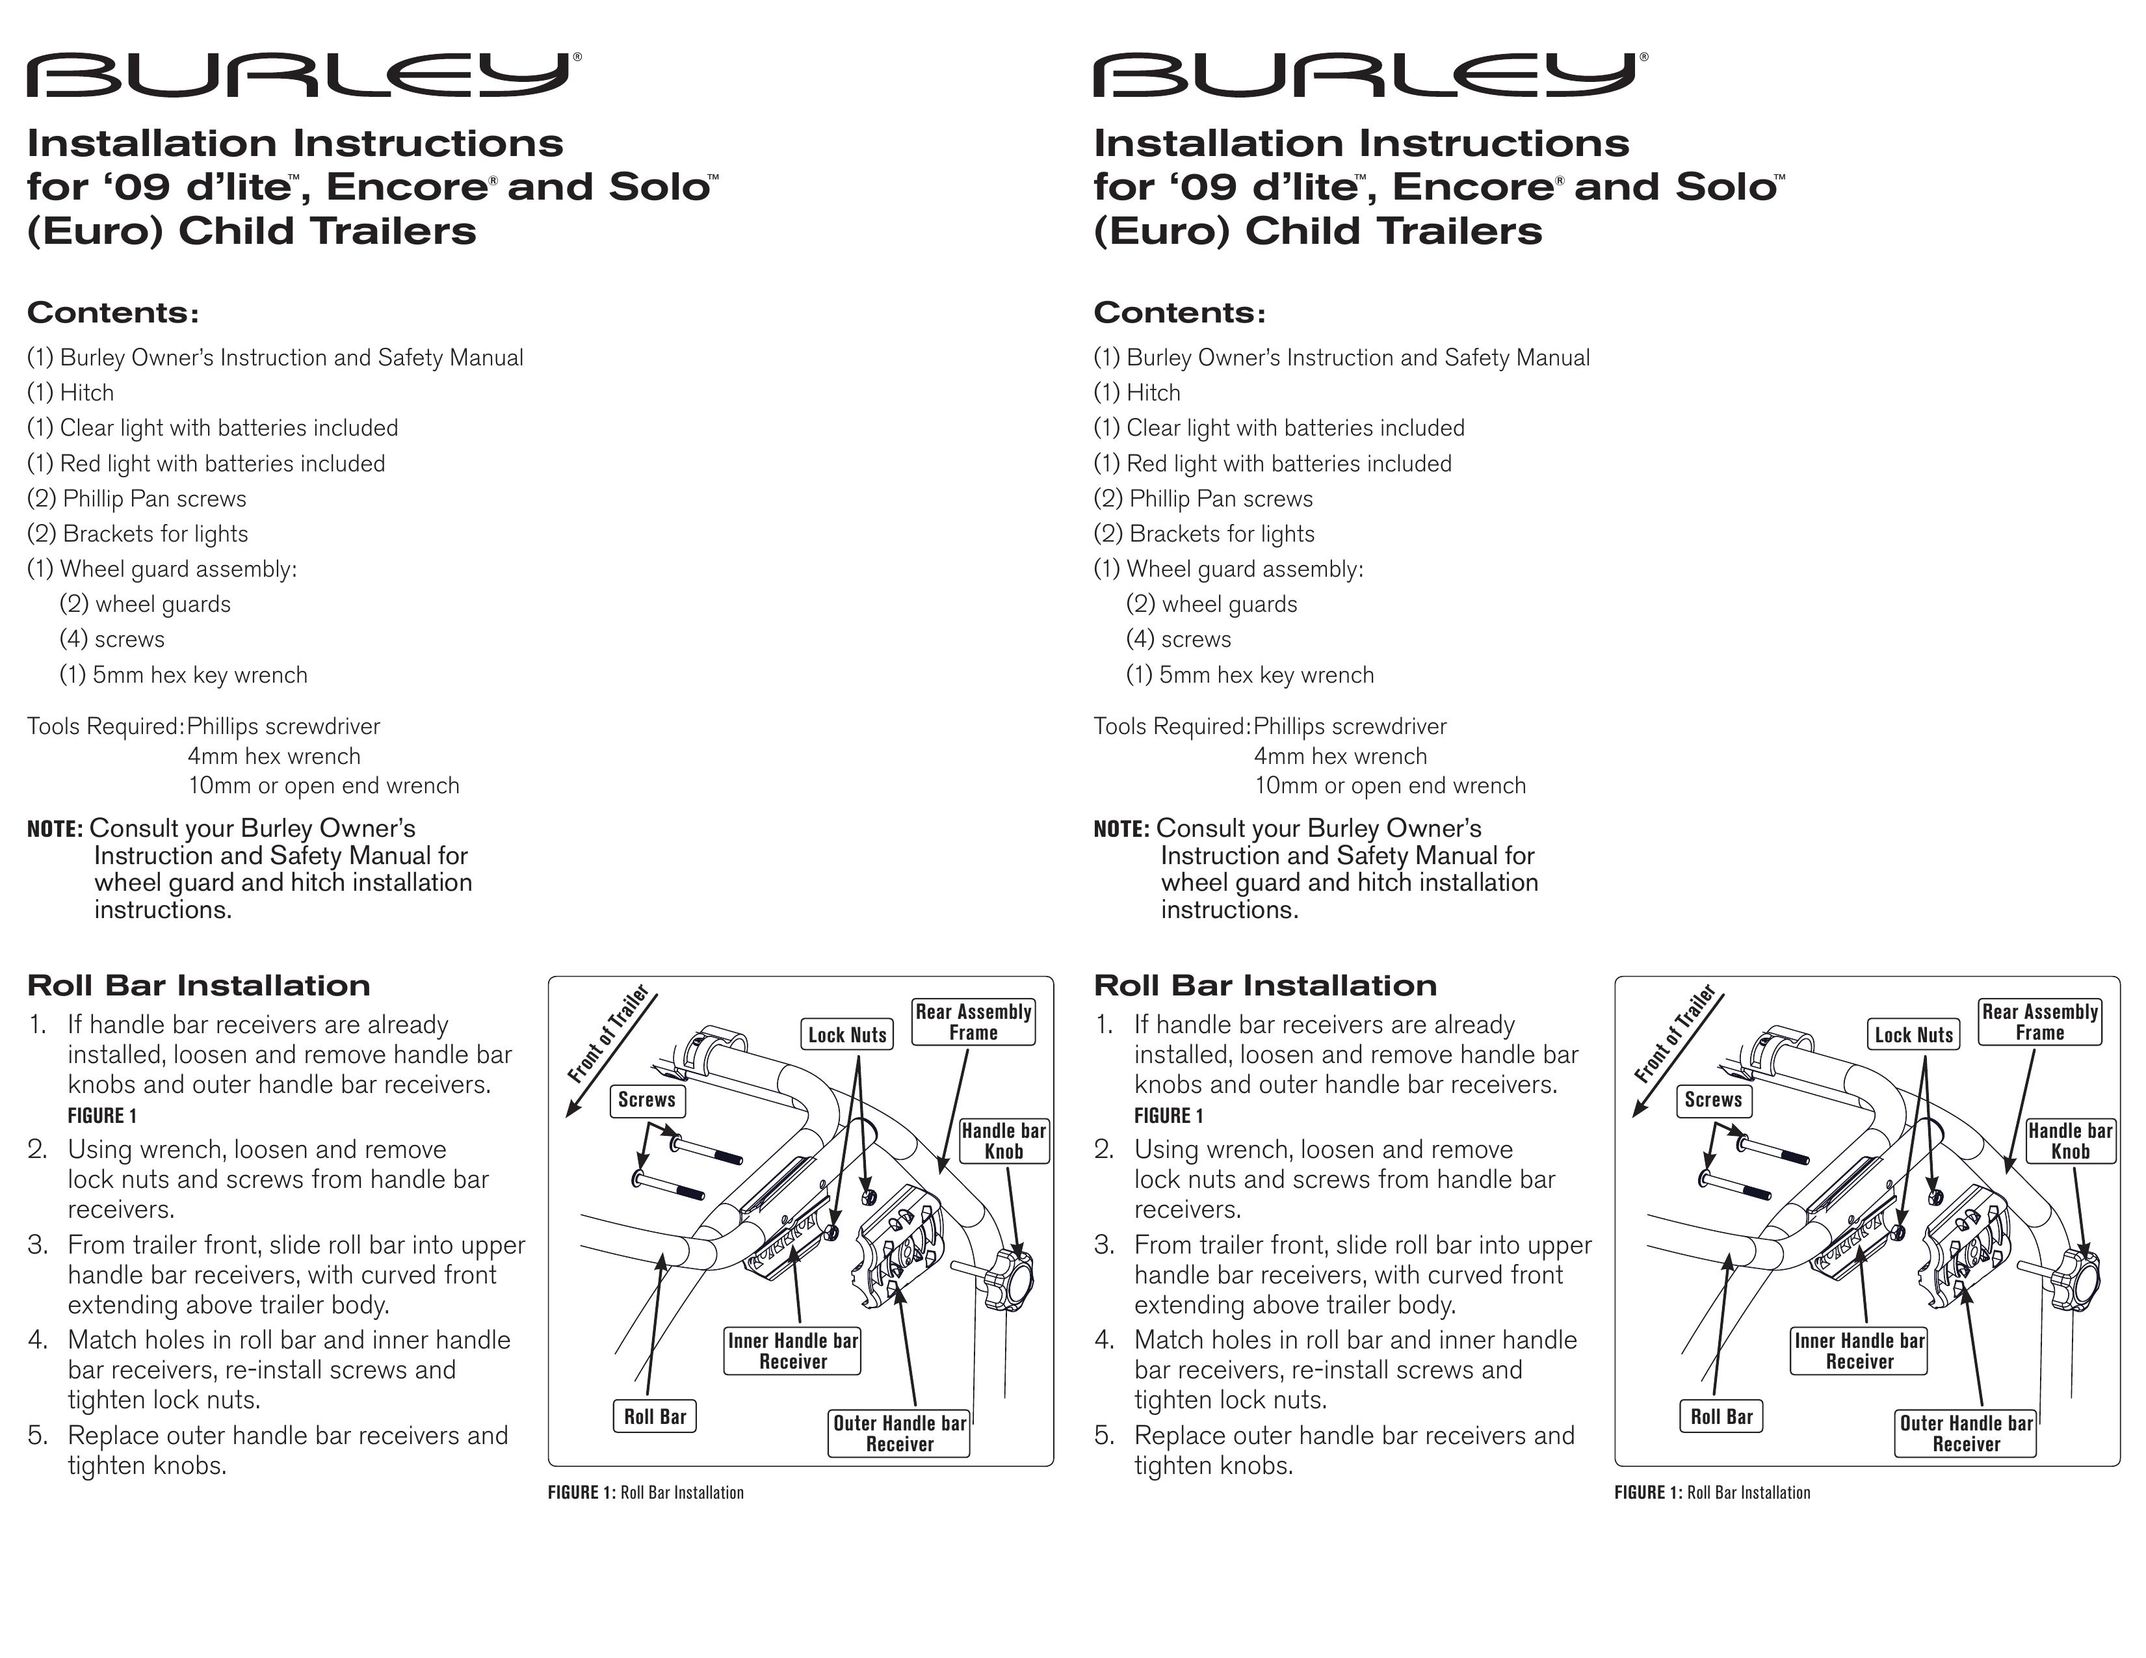 Burley 09 Solo Bicycle Accessories User Manual (Page 1)